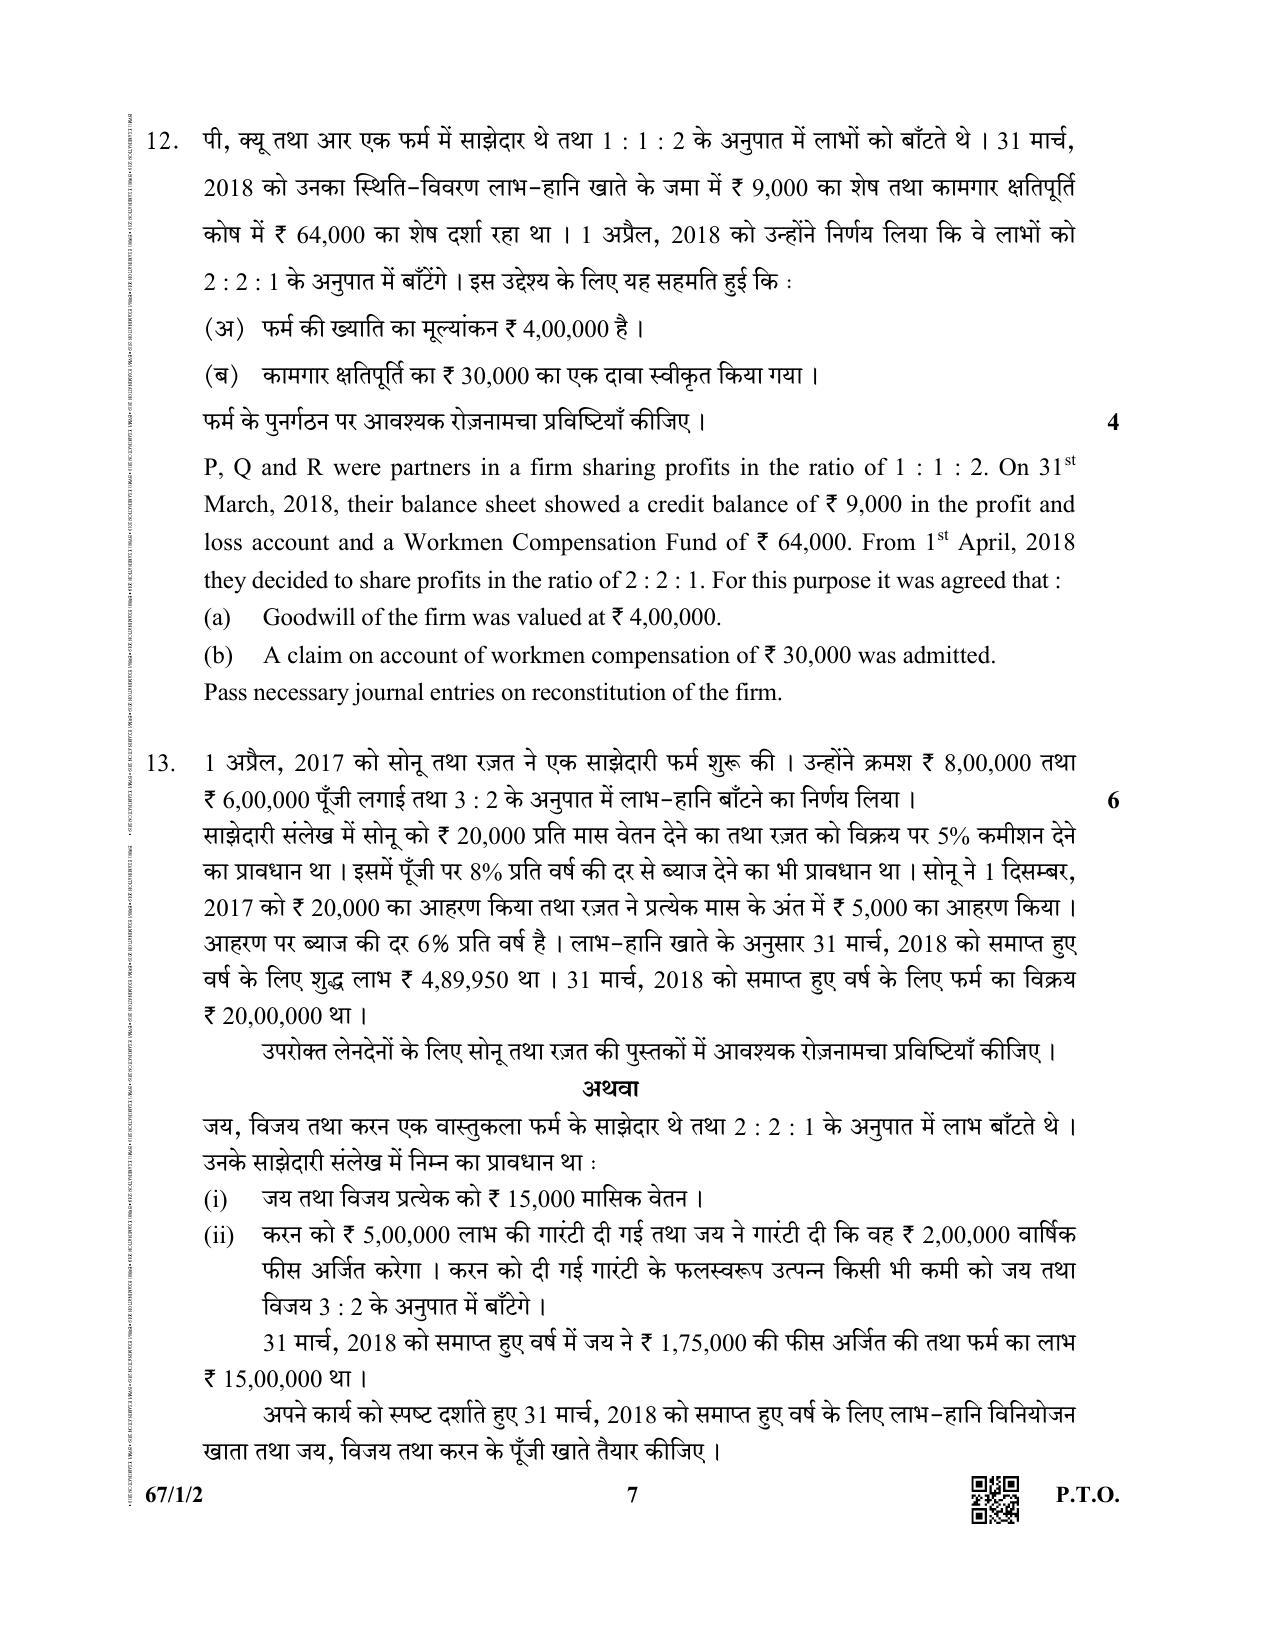 CBSE Class 12 67-1-2  (Accountancy) 2019 Question Paper - Page 7